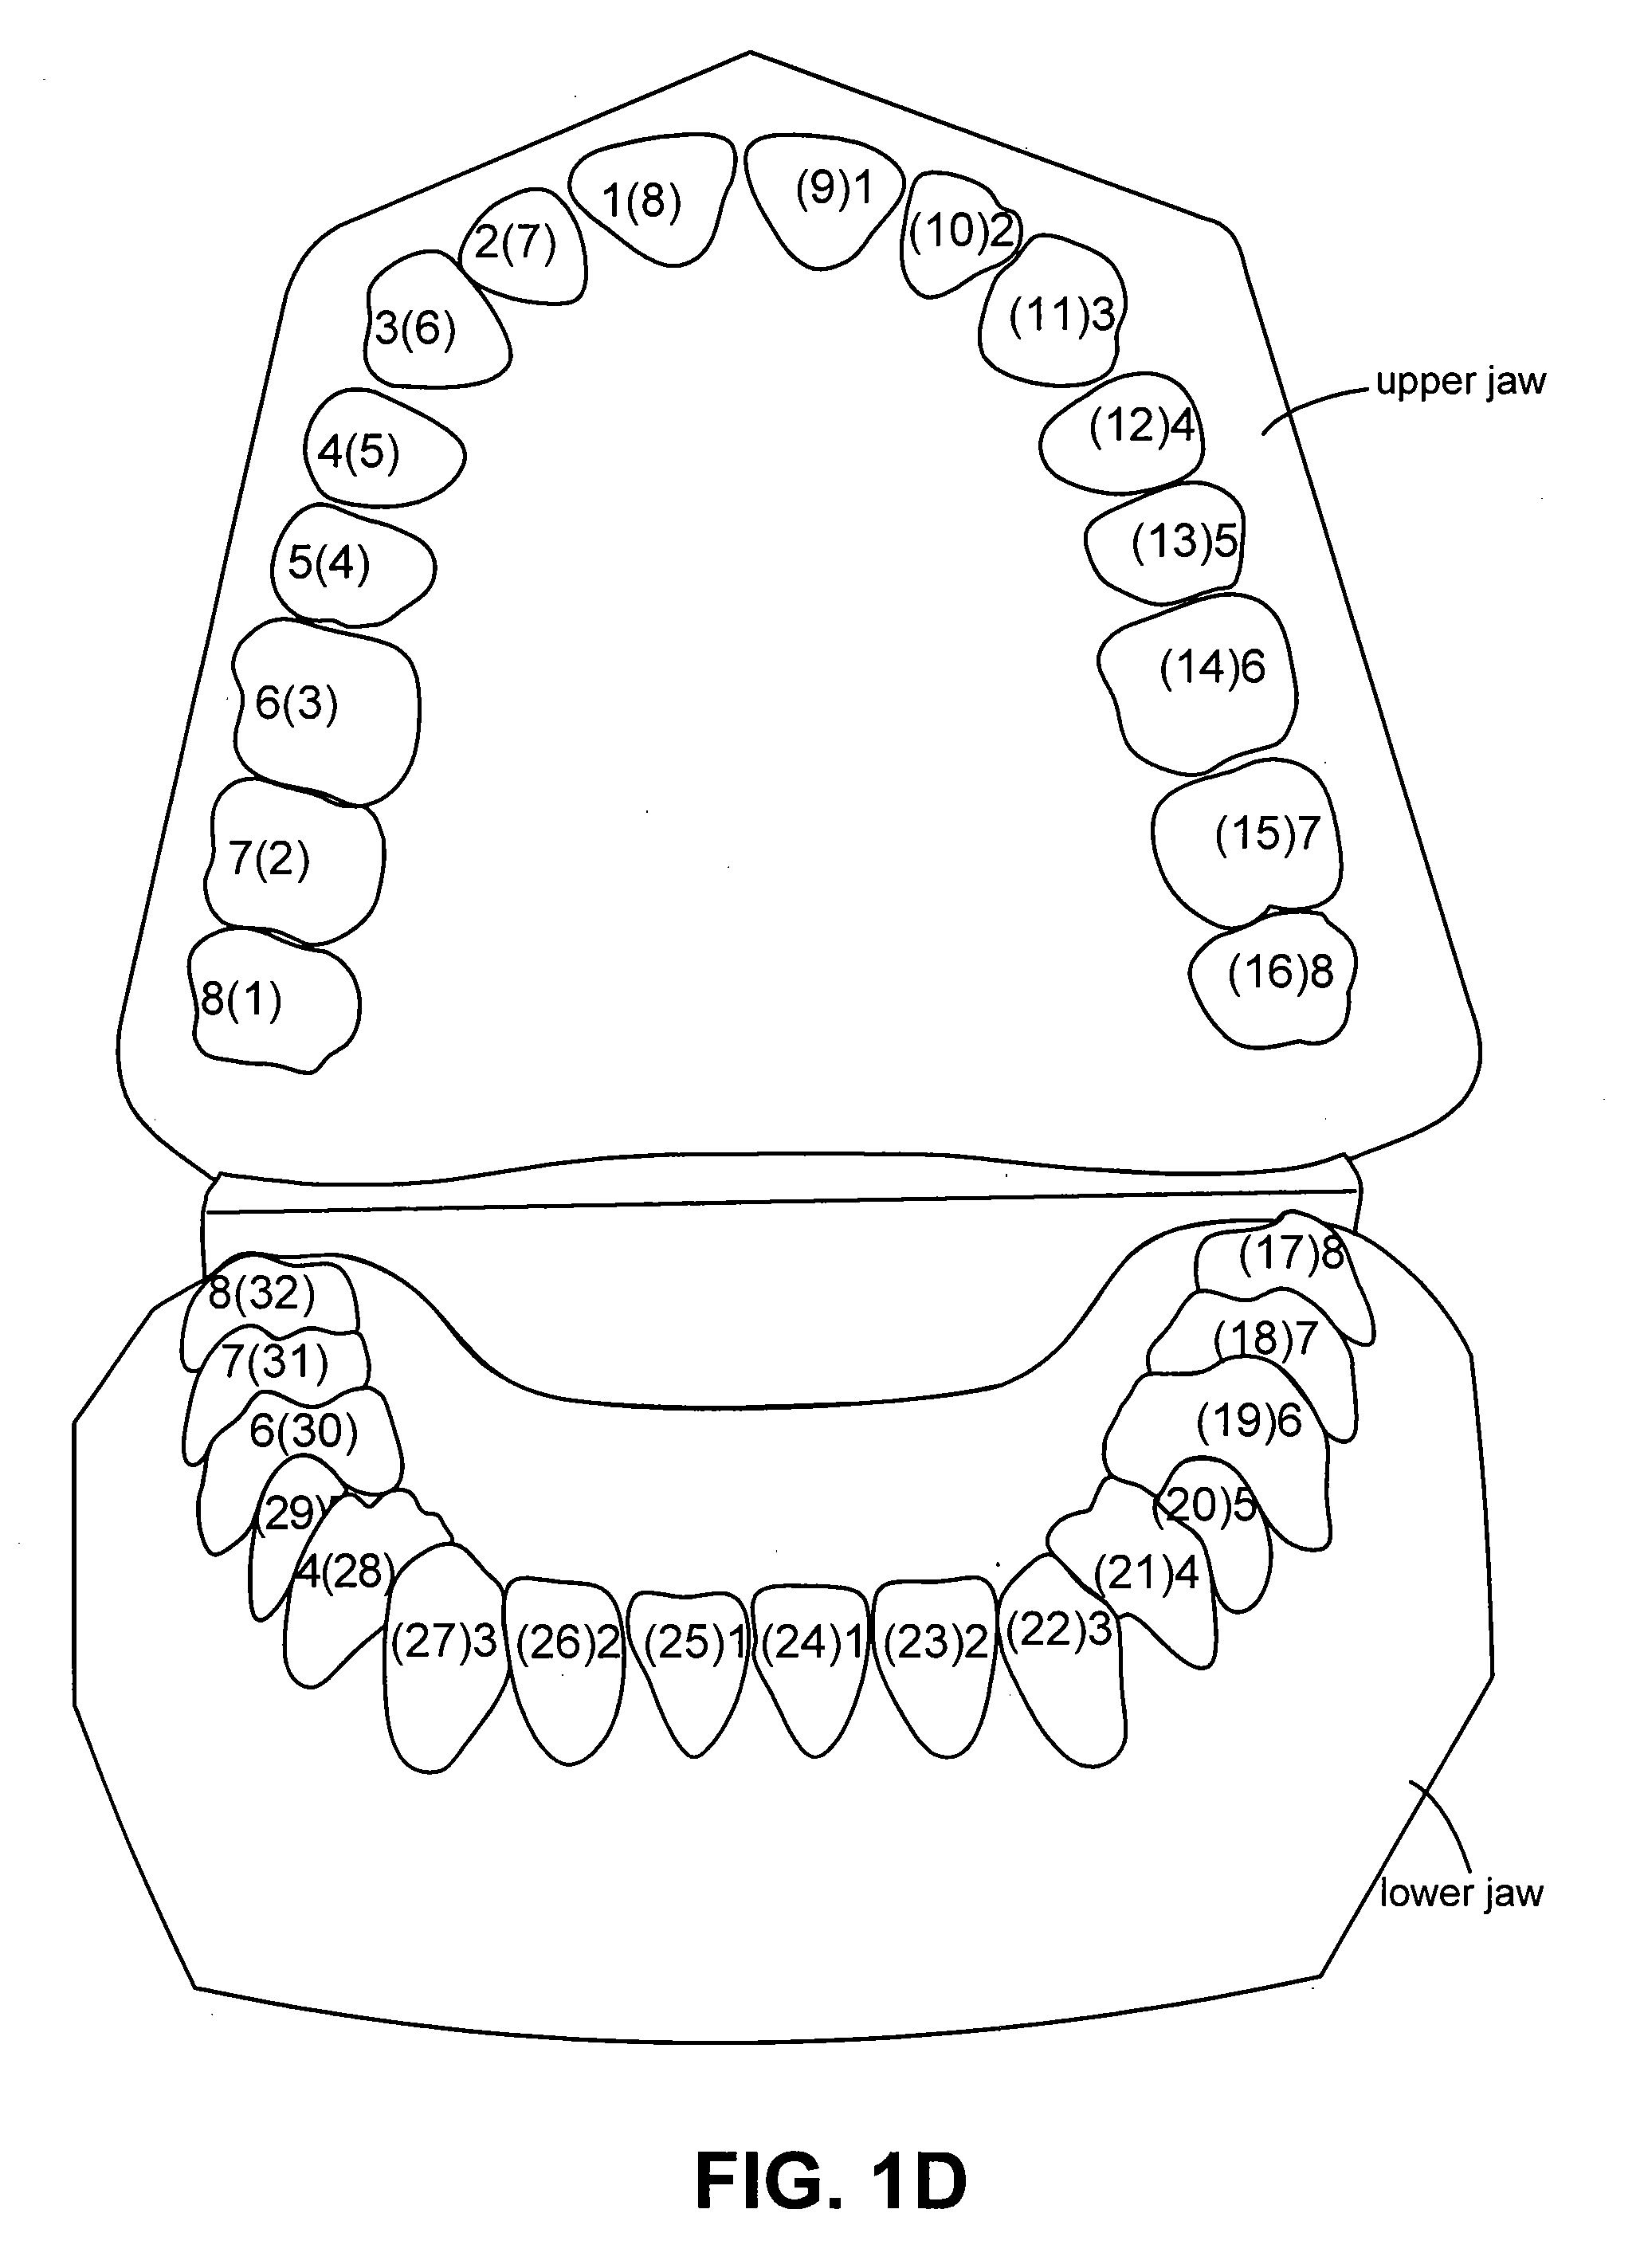 System and method for positioning three-dimensional brackets on teeth